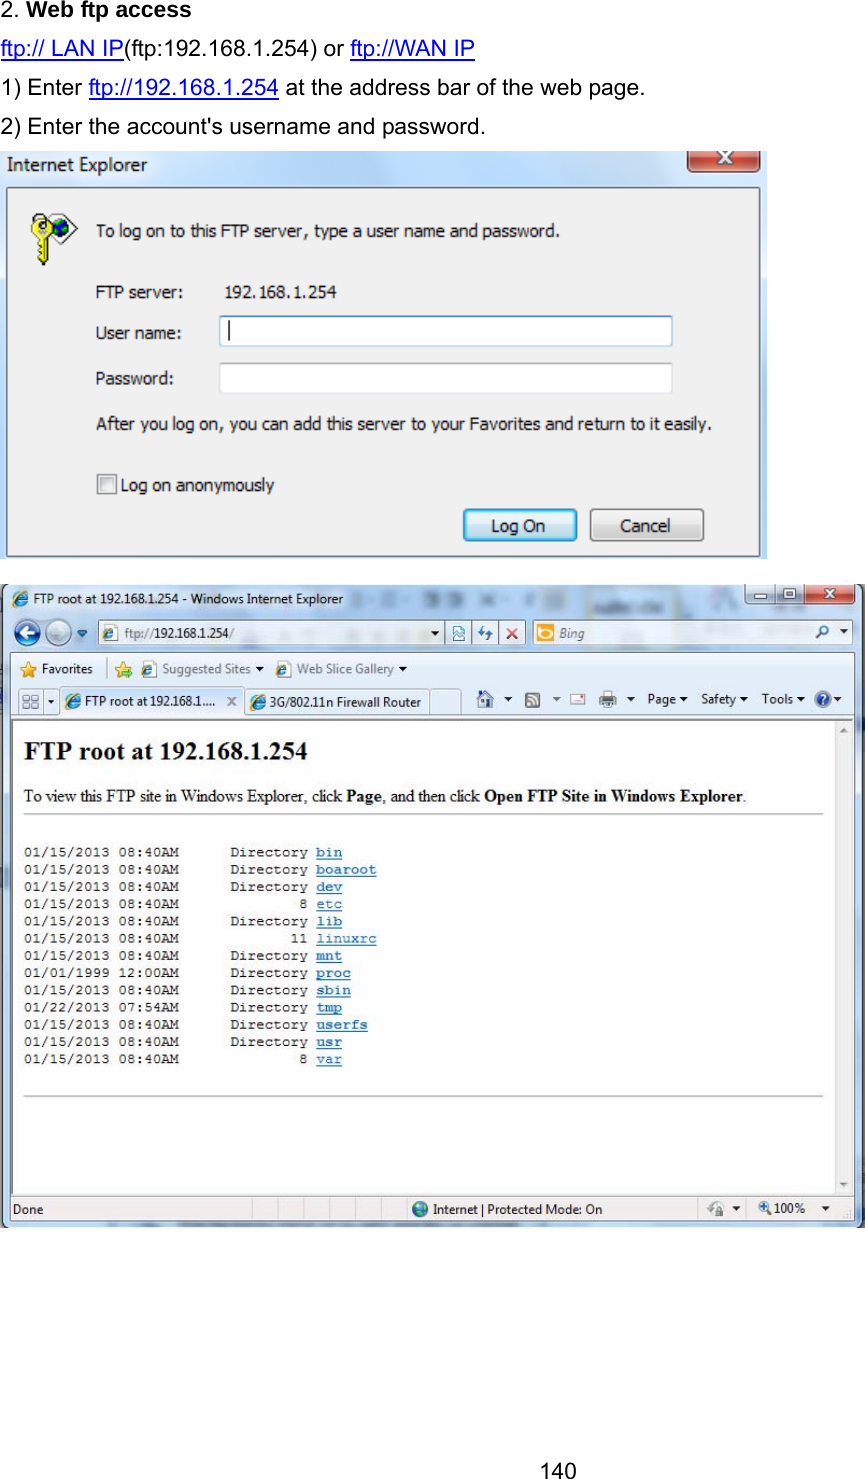 140 2. Web ftp access  ftp:// LAN IP(ftp:192.168.1.254) or ftp://WAN IP 1) Enter ftp://192.168.1.254 at the address bar of the web page. 2) Enter the account&apos;s username and password.      